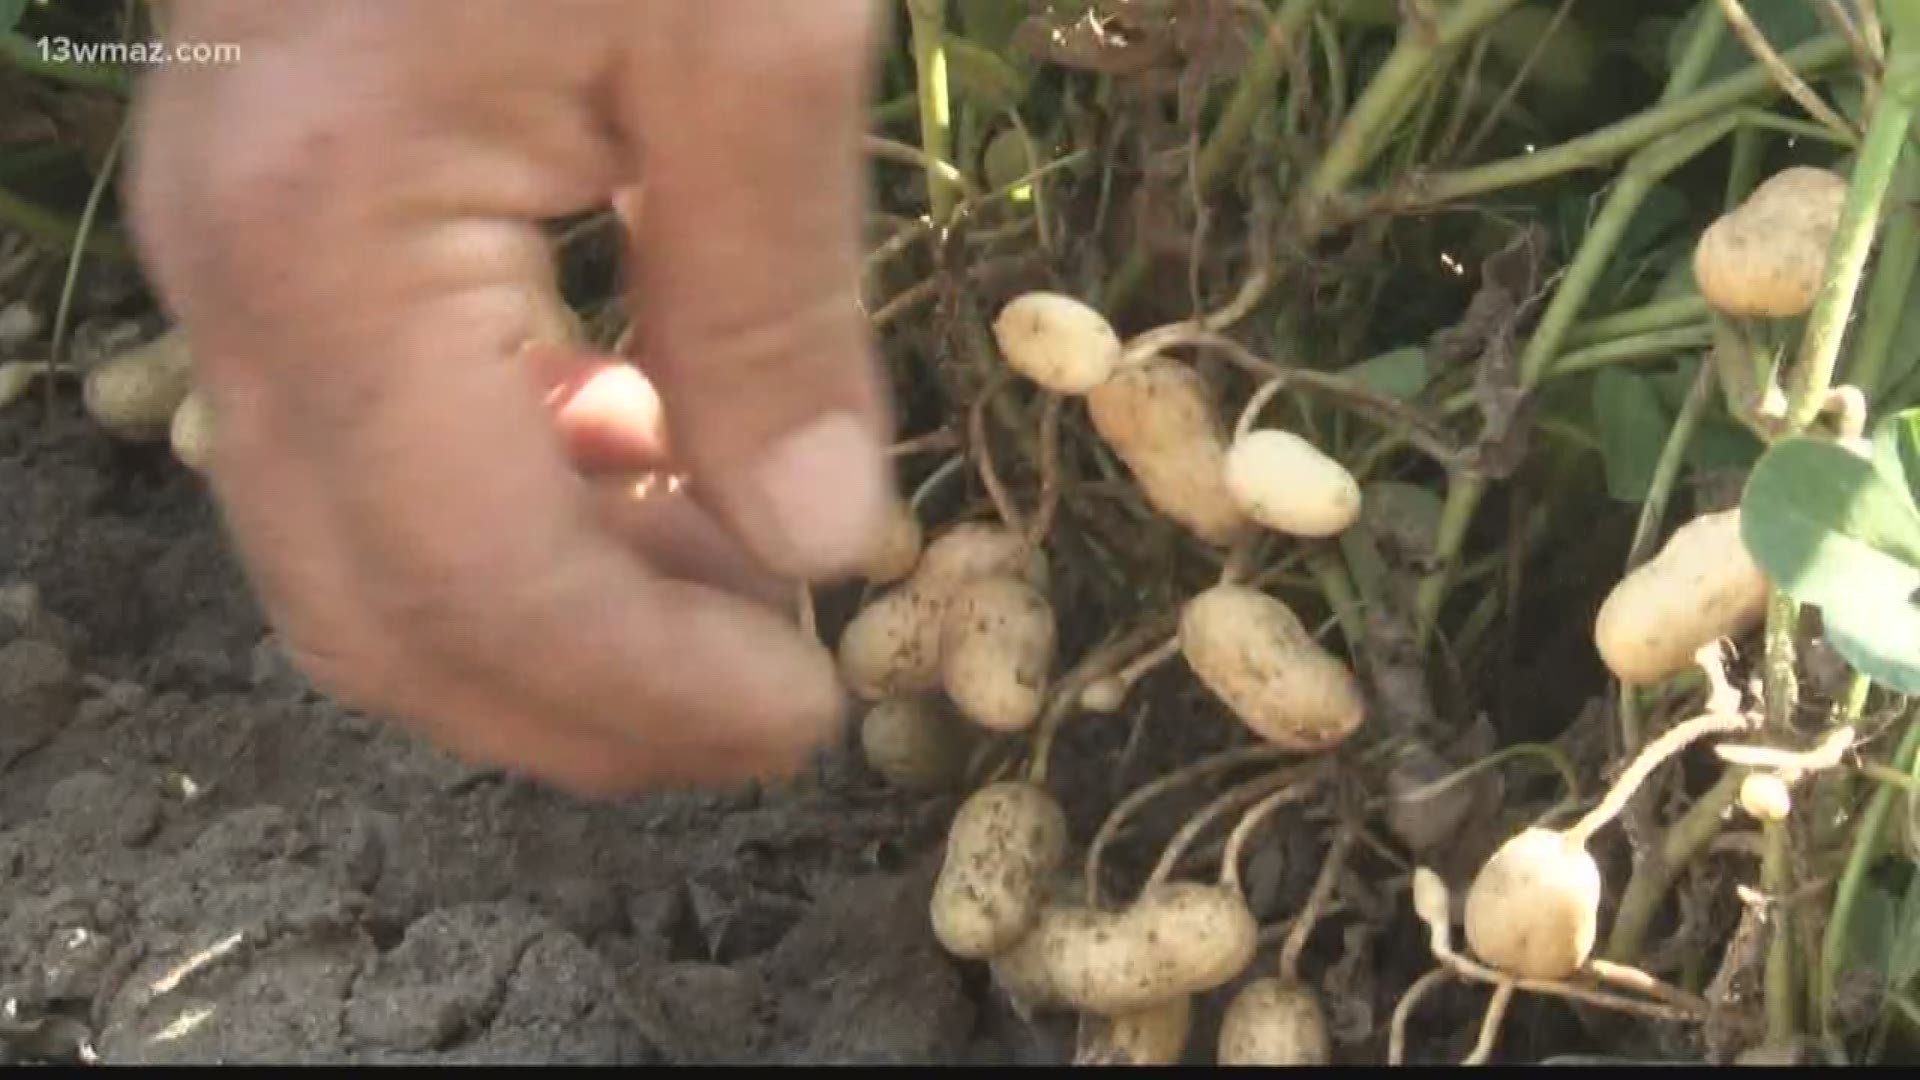 The peanut harvest is just a few weeks away, but over at Chase Farms in Macon County, they're still celebrating the 2018 Harvest. Courteney Jacobazzi takes you out to one of their peanut fields where one farmer hopes another good crop will soon come out of the ground.